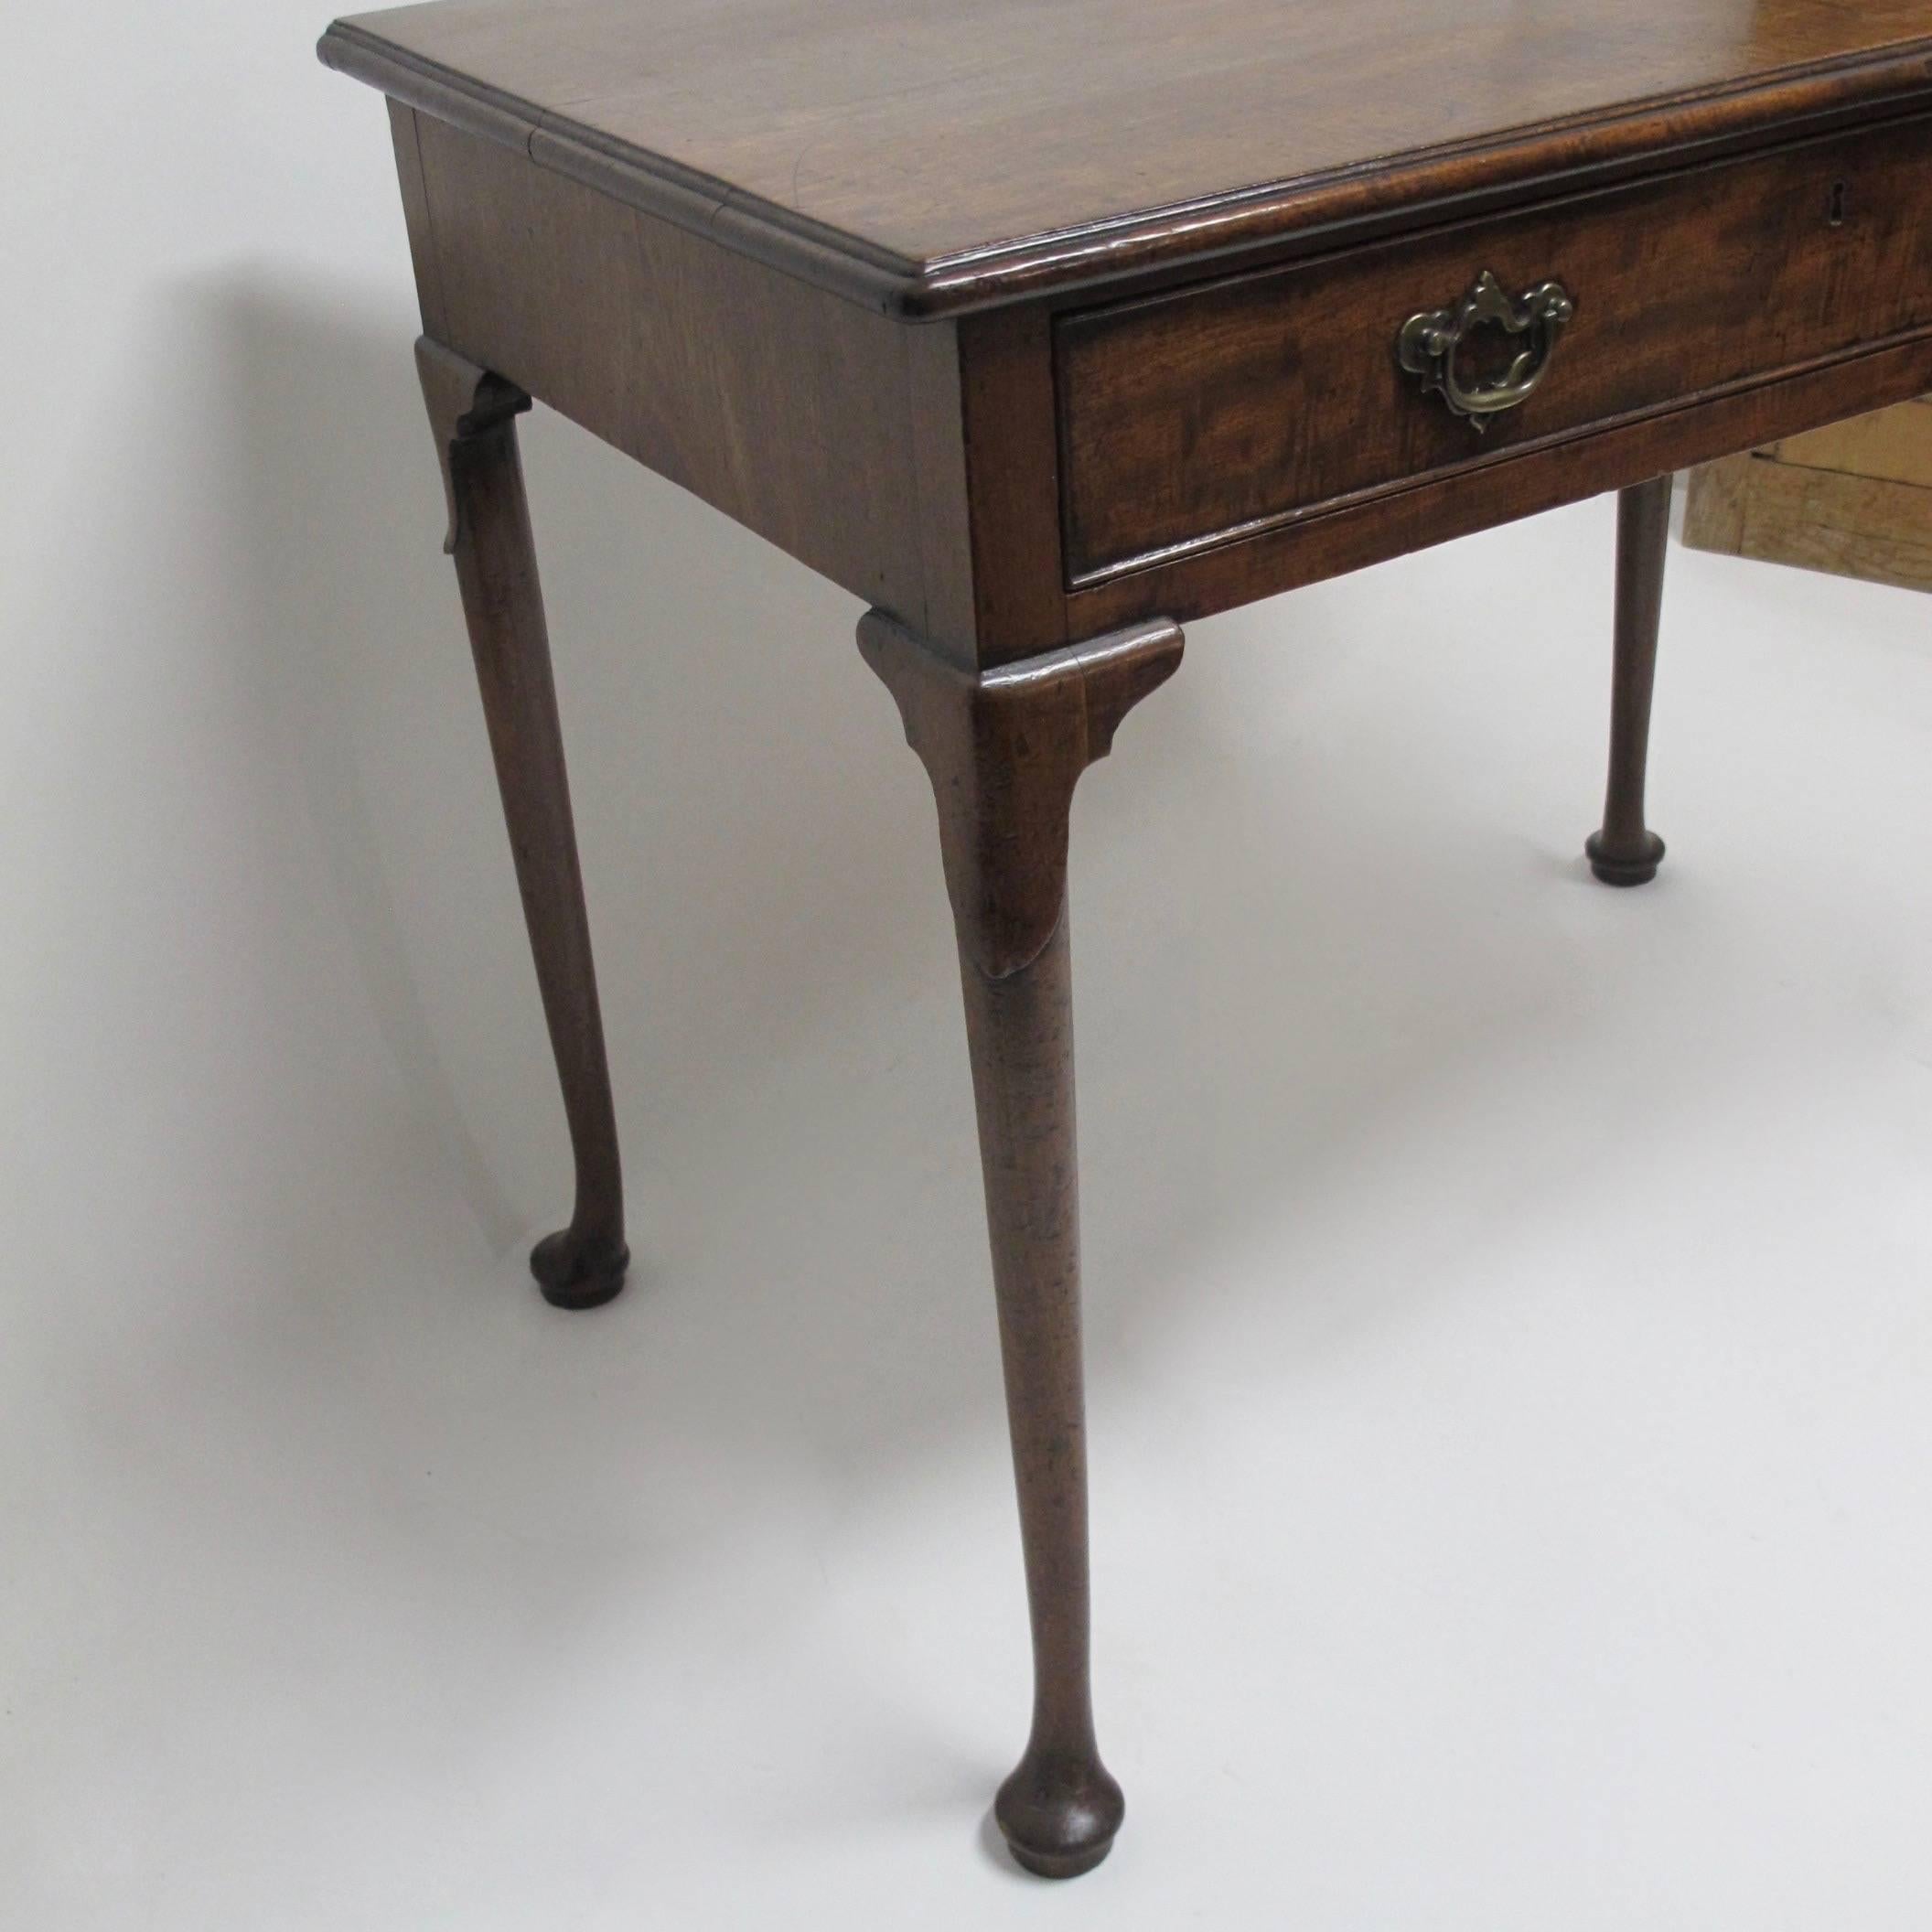 Irish mahogany single drawer writing table with brass pulls, carved knees, ending in Queen Ann pad feet. Irish, circa 1790.